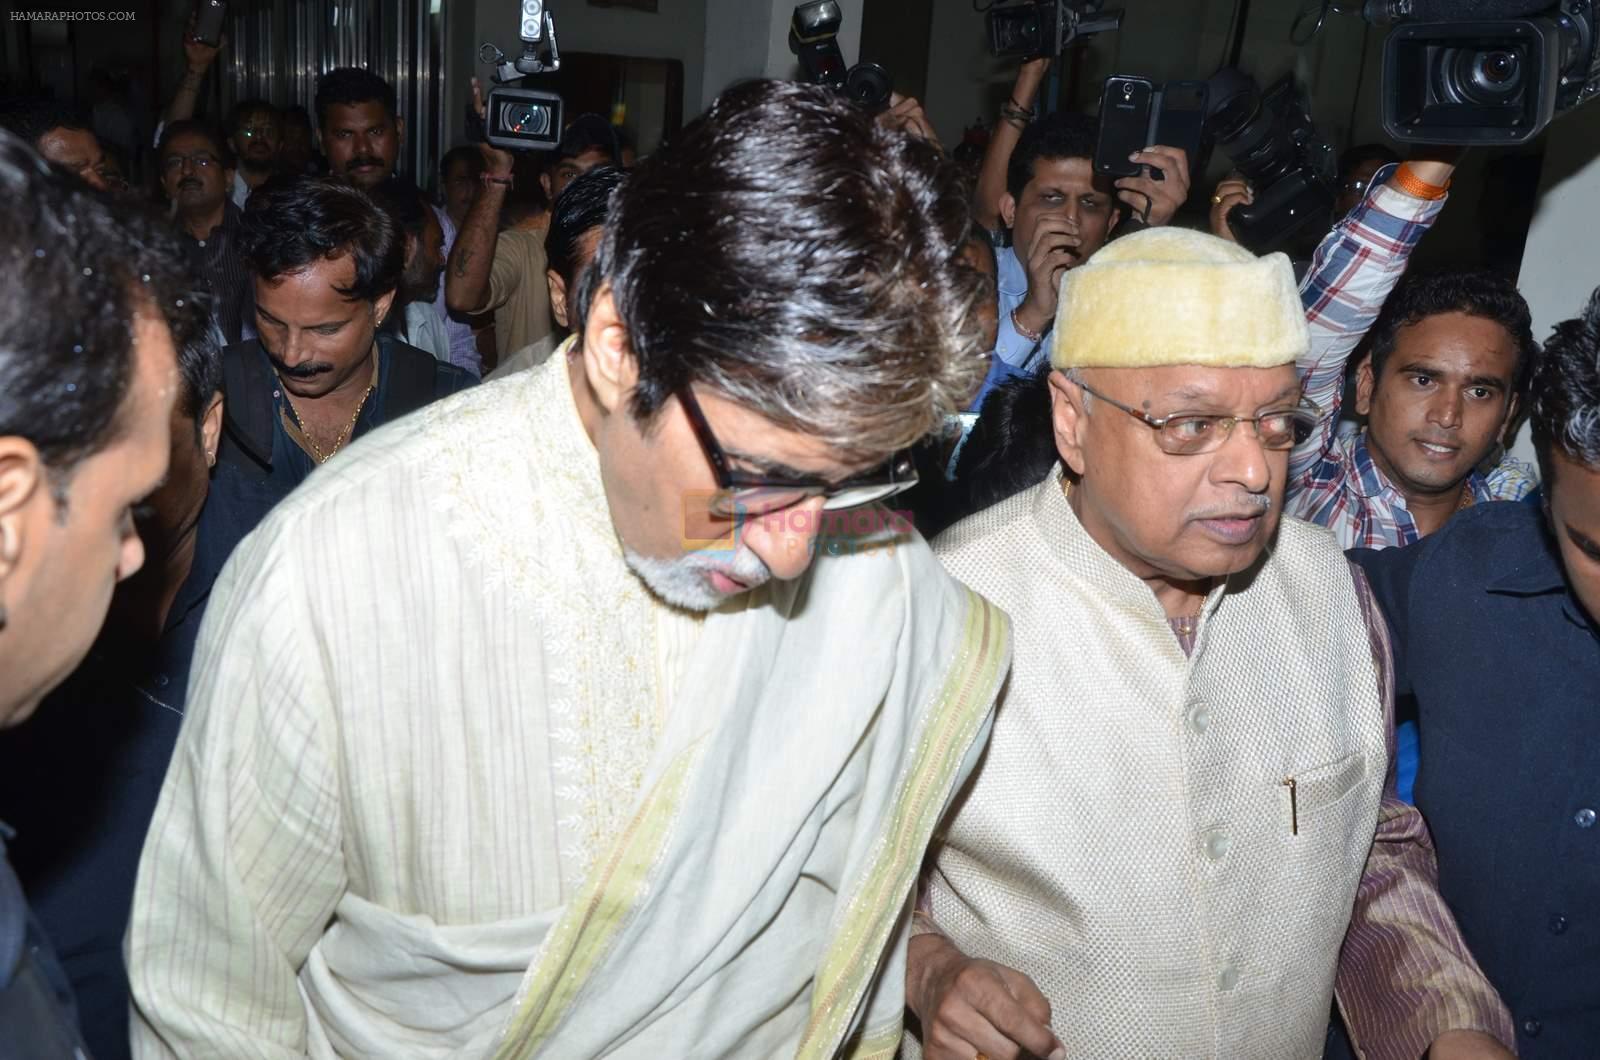 Amitabh Bachchan at a book reading at Marathi event on 16th June 2015